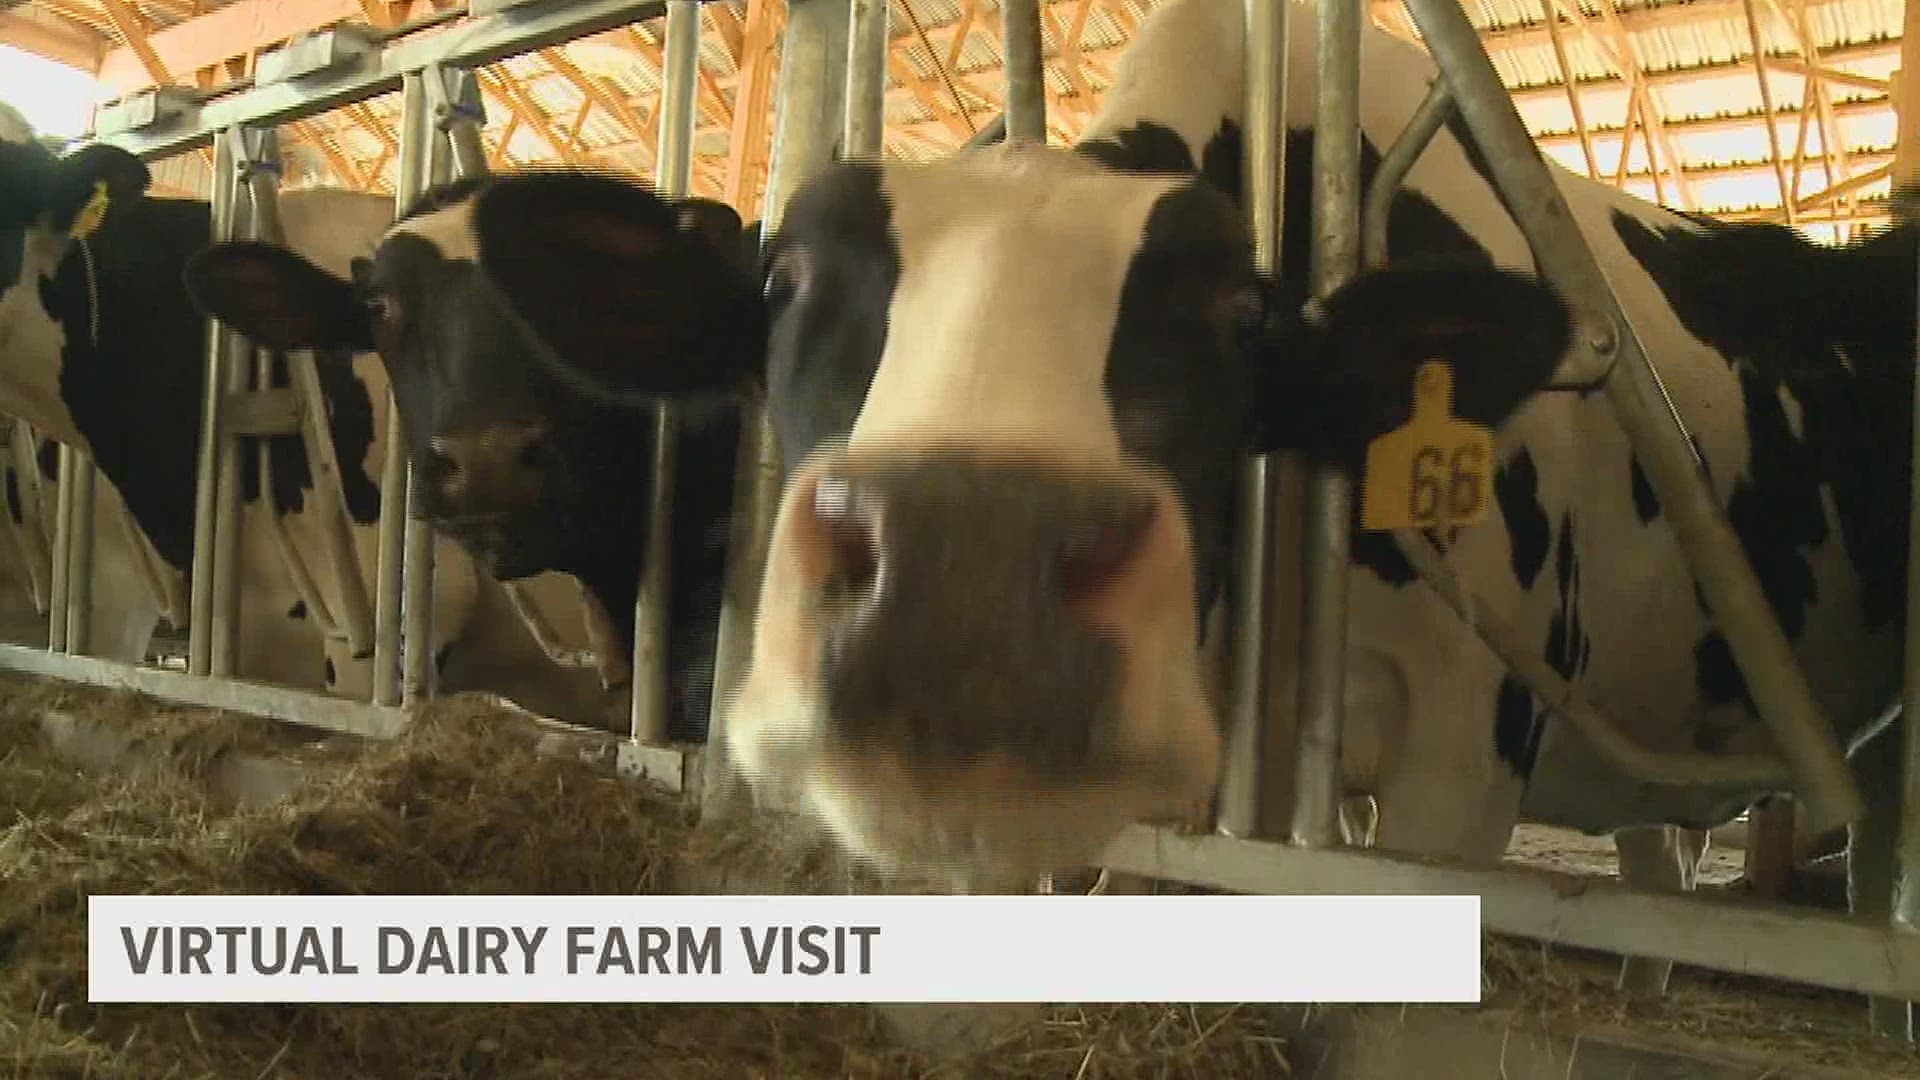 A Lebanon County farm is holding a virtual tour to teach young children about how milk is produced and the farmers helping to make it, safely.